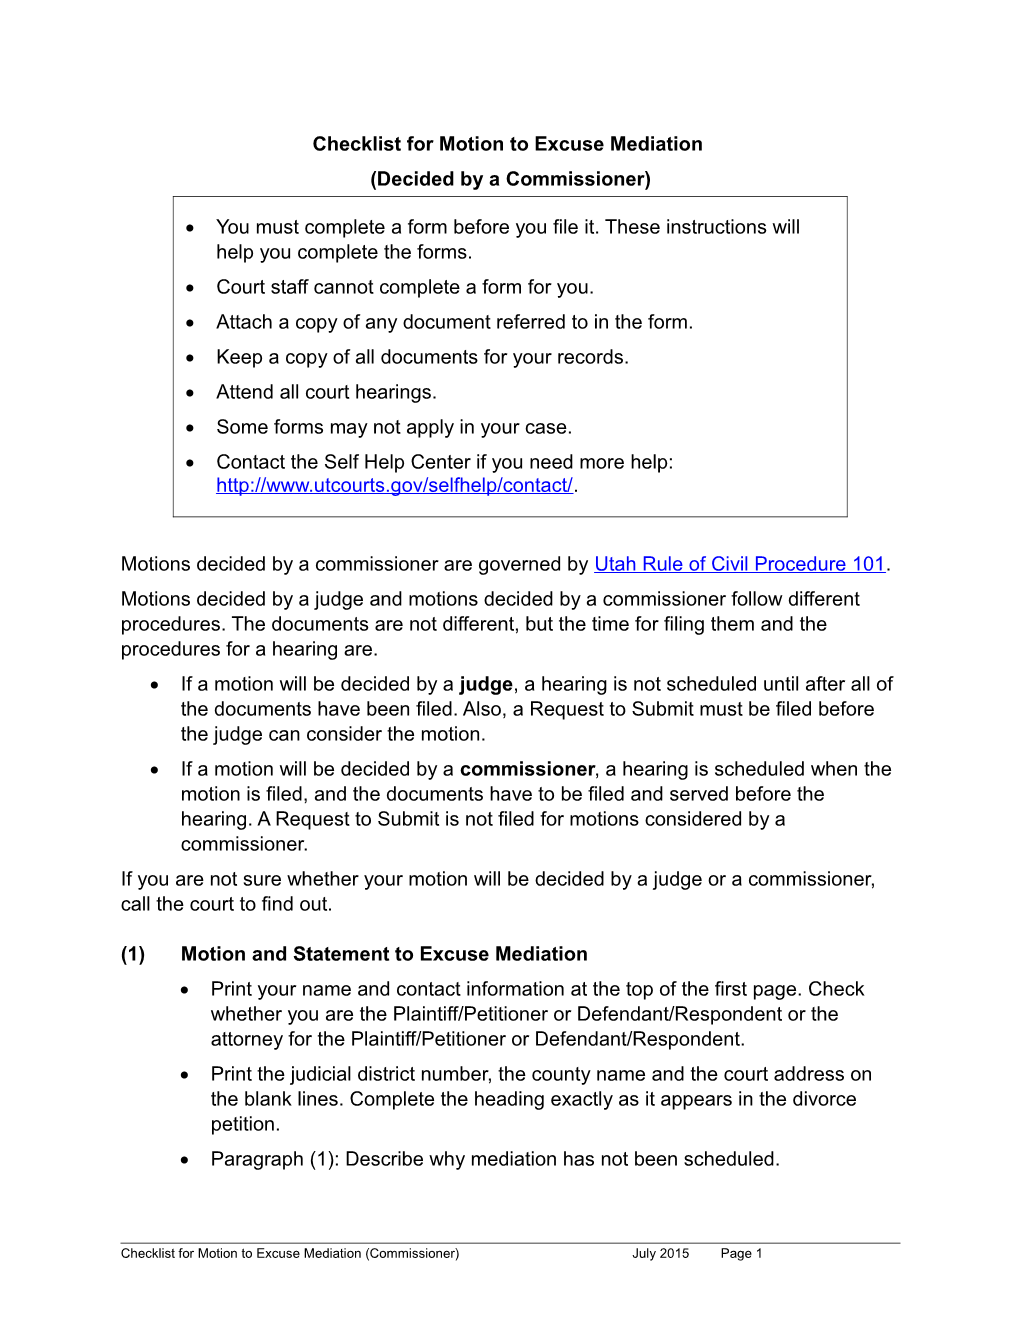 Checklist for Motion to Excuse Mediation (Decided by a Commissioner)